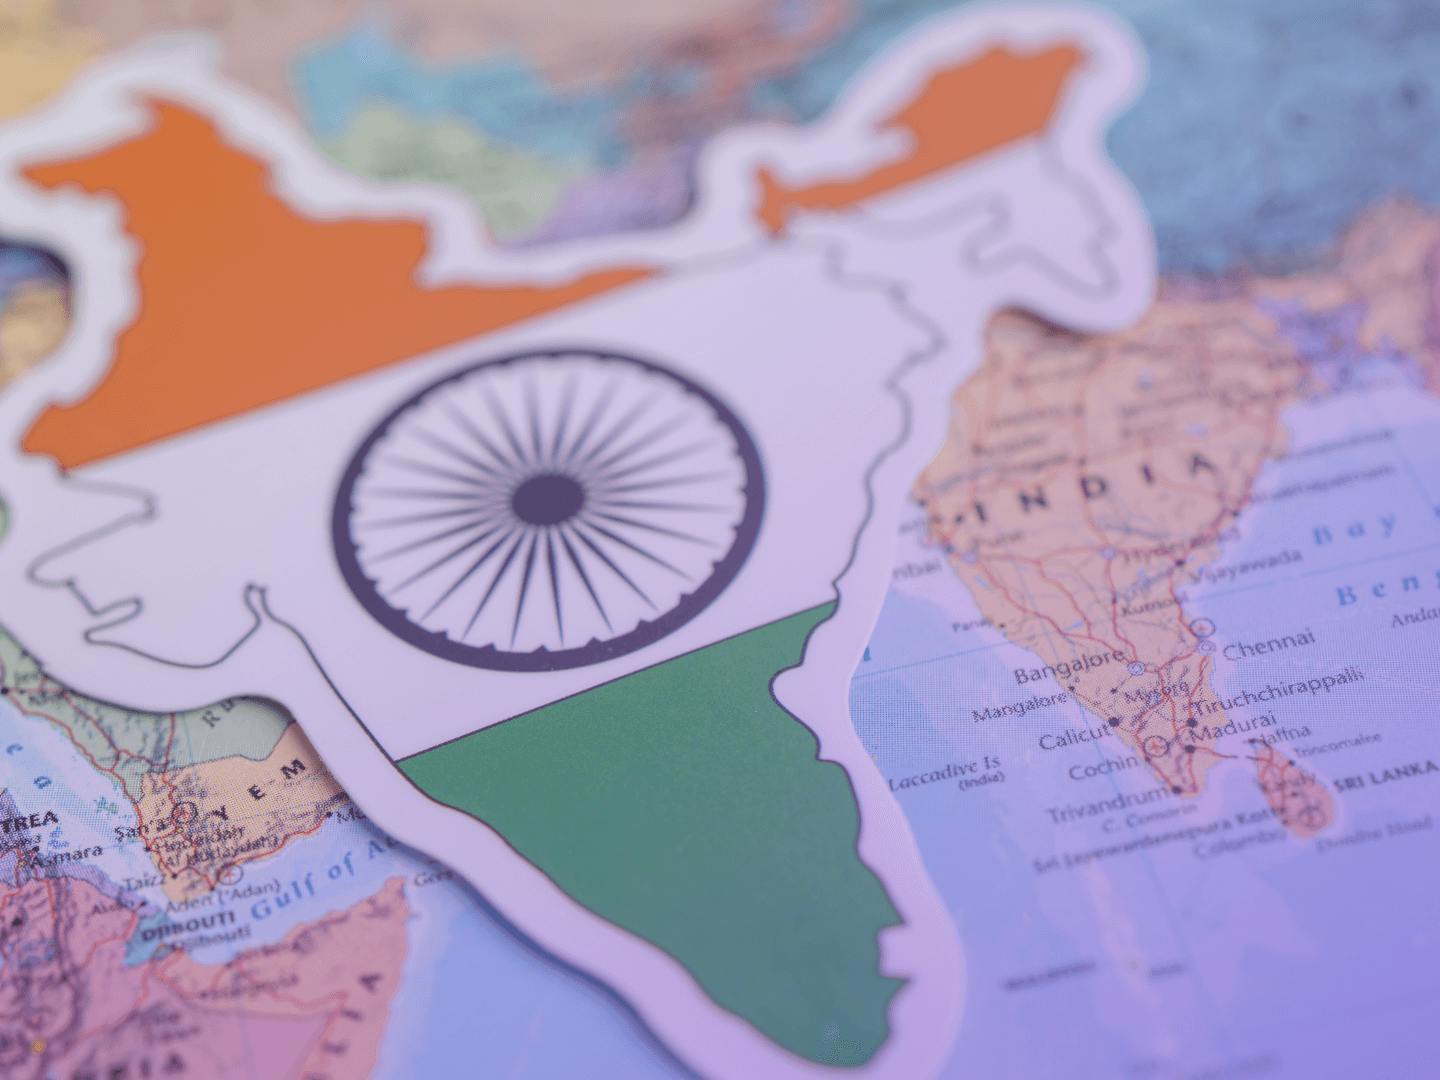 A close-up of a map with an Indian flag on it.